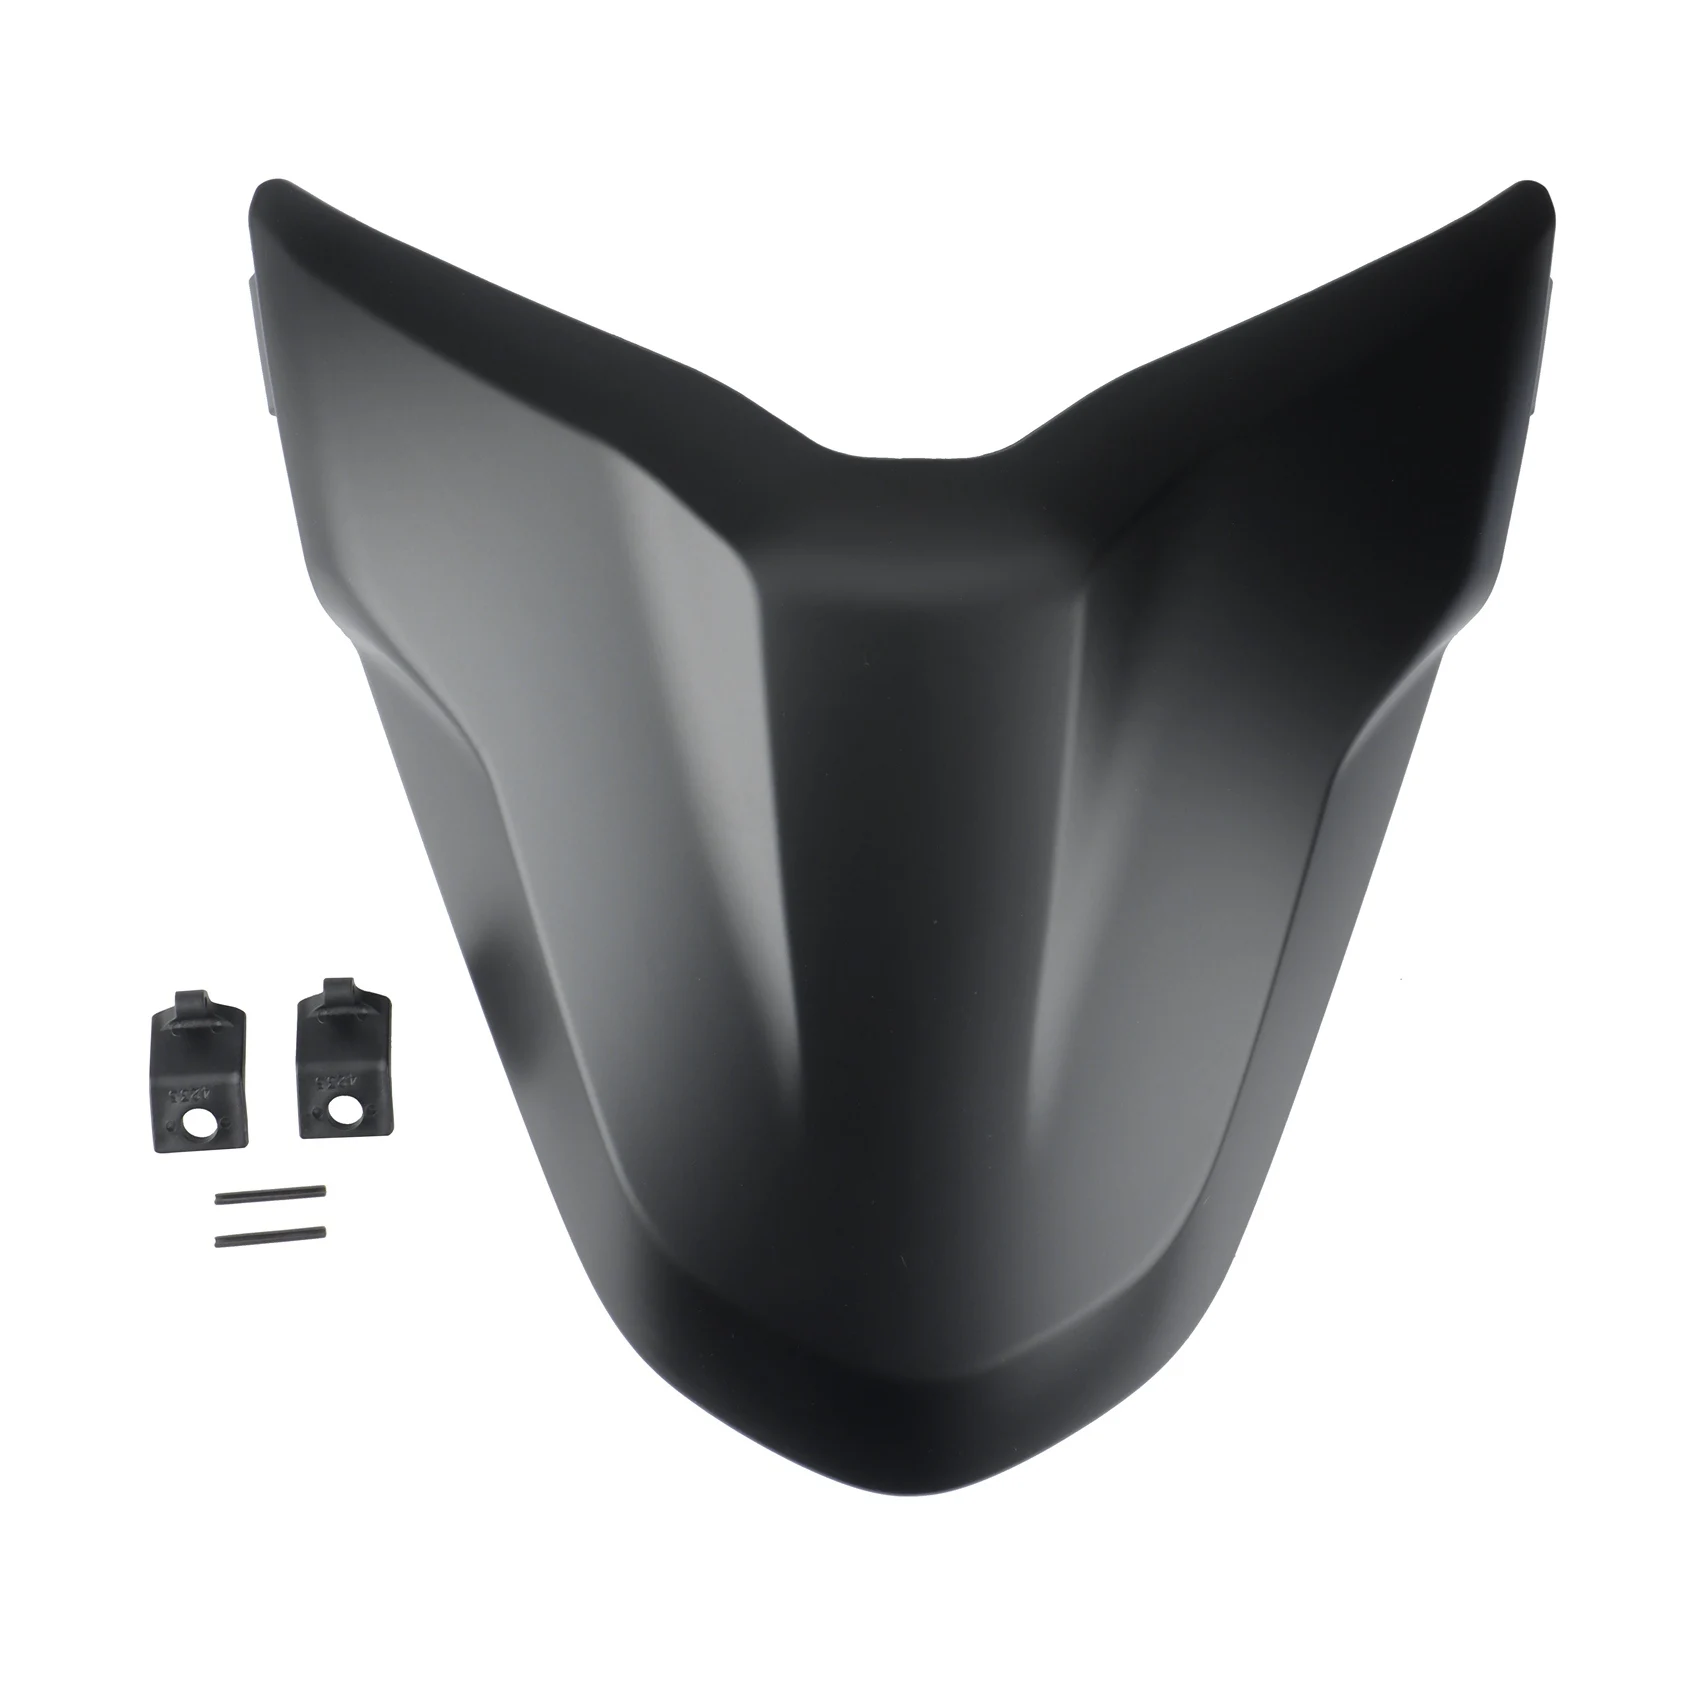 

Seat Cover Cowl Fairing Solo Motorcycle Rear Passenger Pillion for Ducati Supersport 939 950 2020 2021(Matte